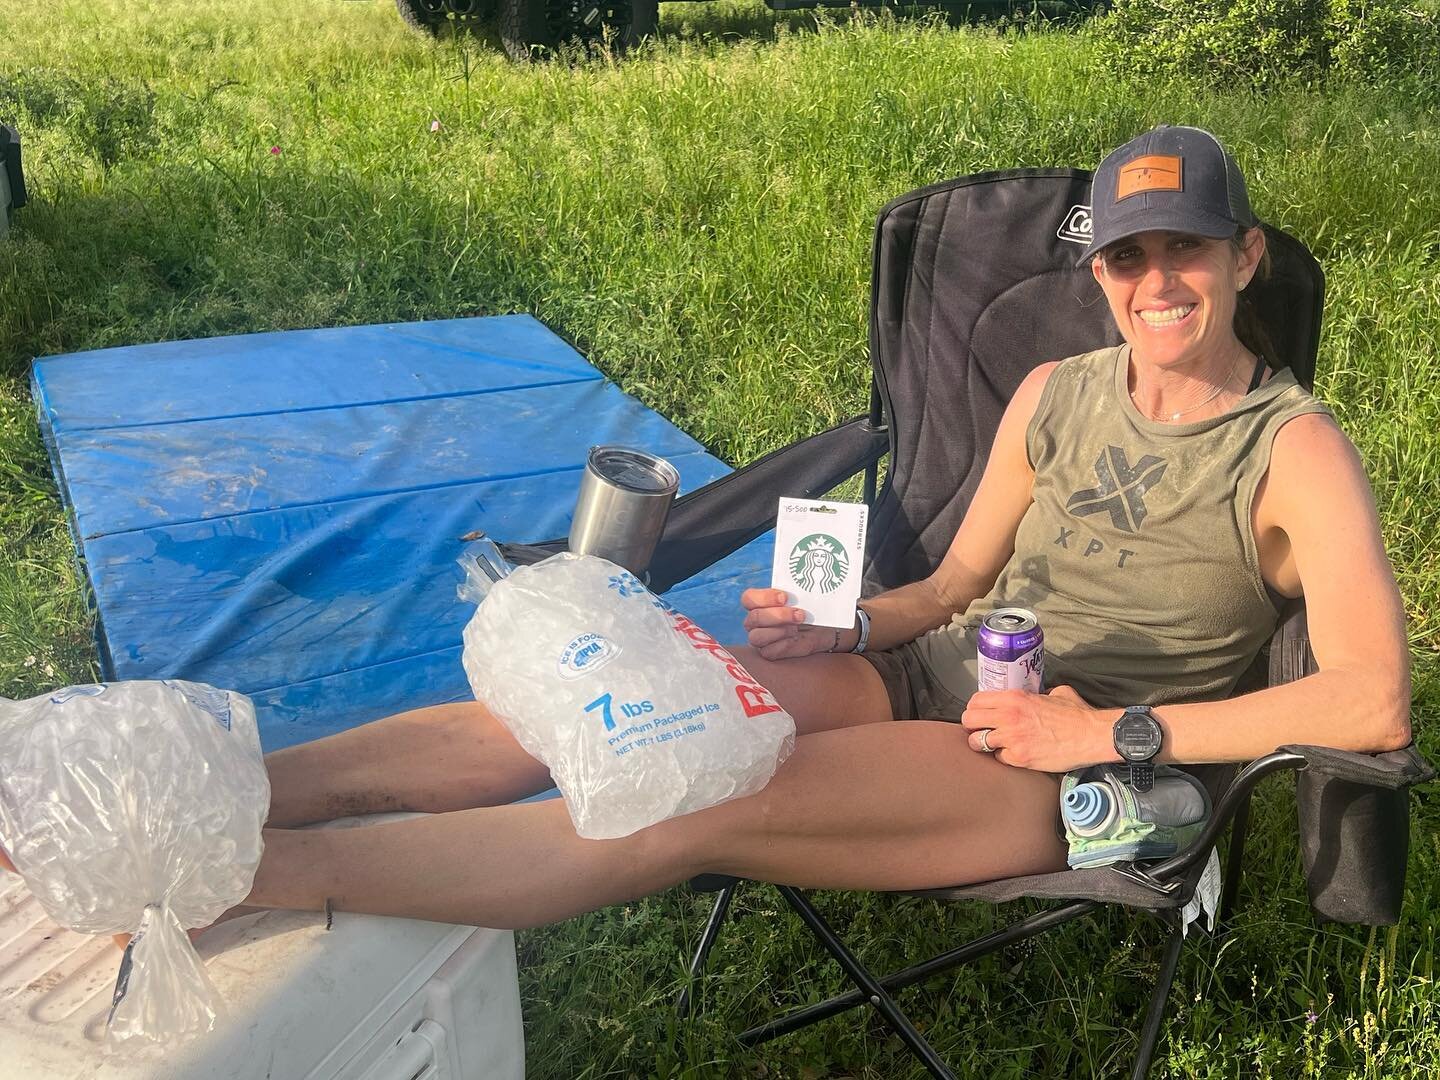 Yard 10 was a prime yard and impressively won by @leanbeanmachine. She ran this yard nearly 3 minutes faster than the previous one!

Stay strong, LeAnn! Enjoy a caffeine pick-me-up from Starbucks. Congrats!!

#thegame #spectrumtrailracing #prime